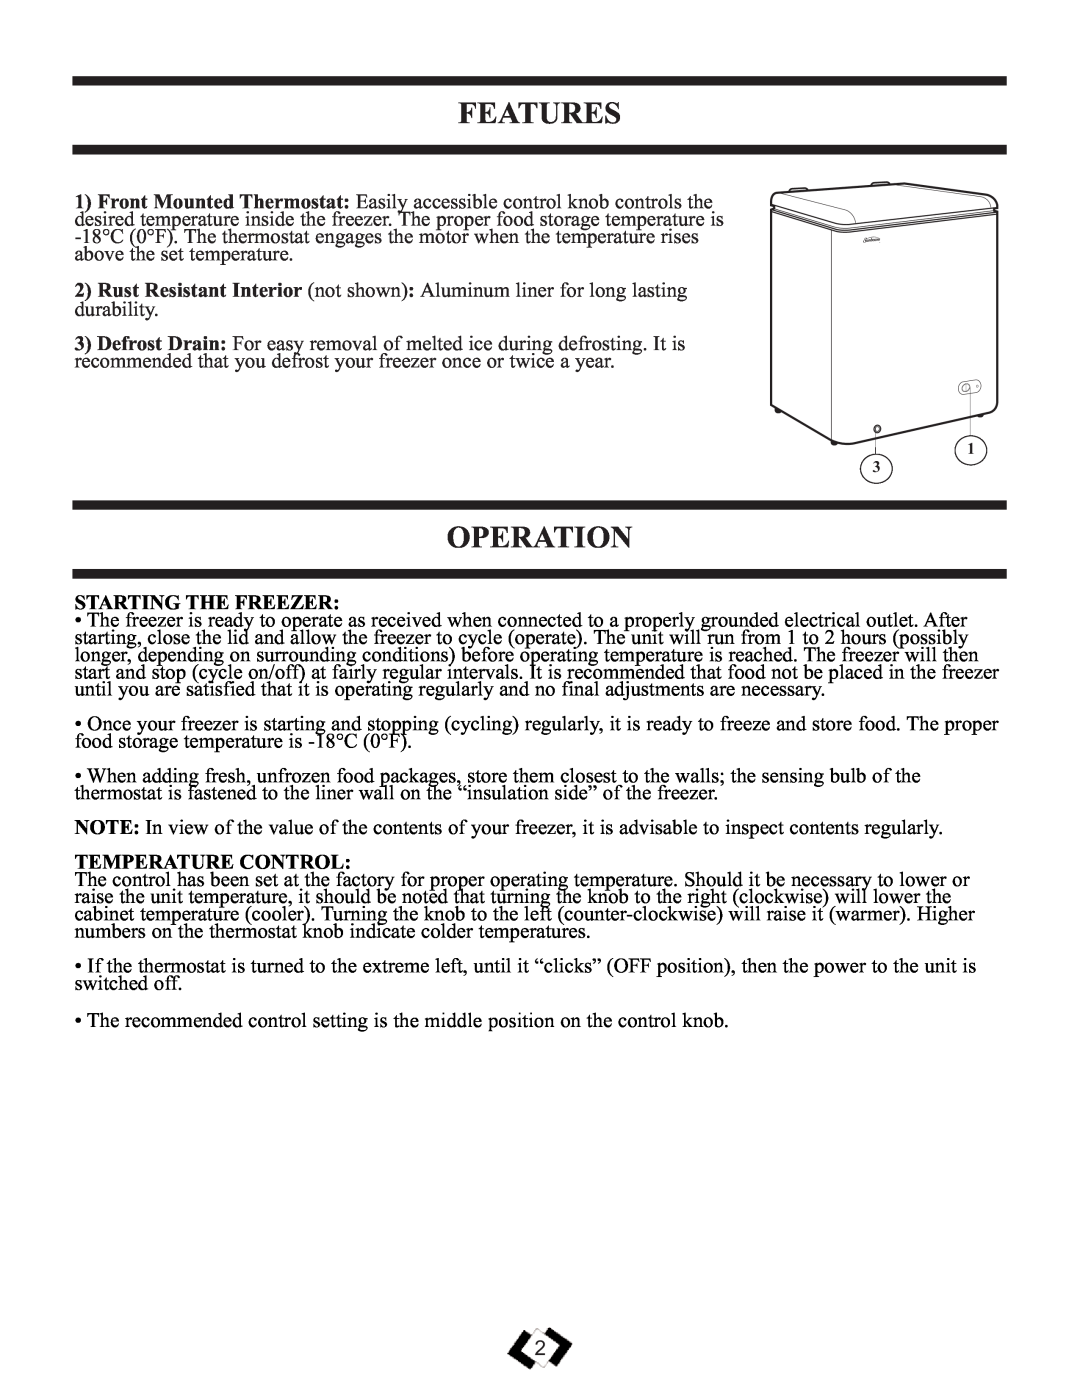 Danby DCFM102WSB important safety instructions Features, Operation, Starting The Freezer, Temperature Control 